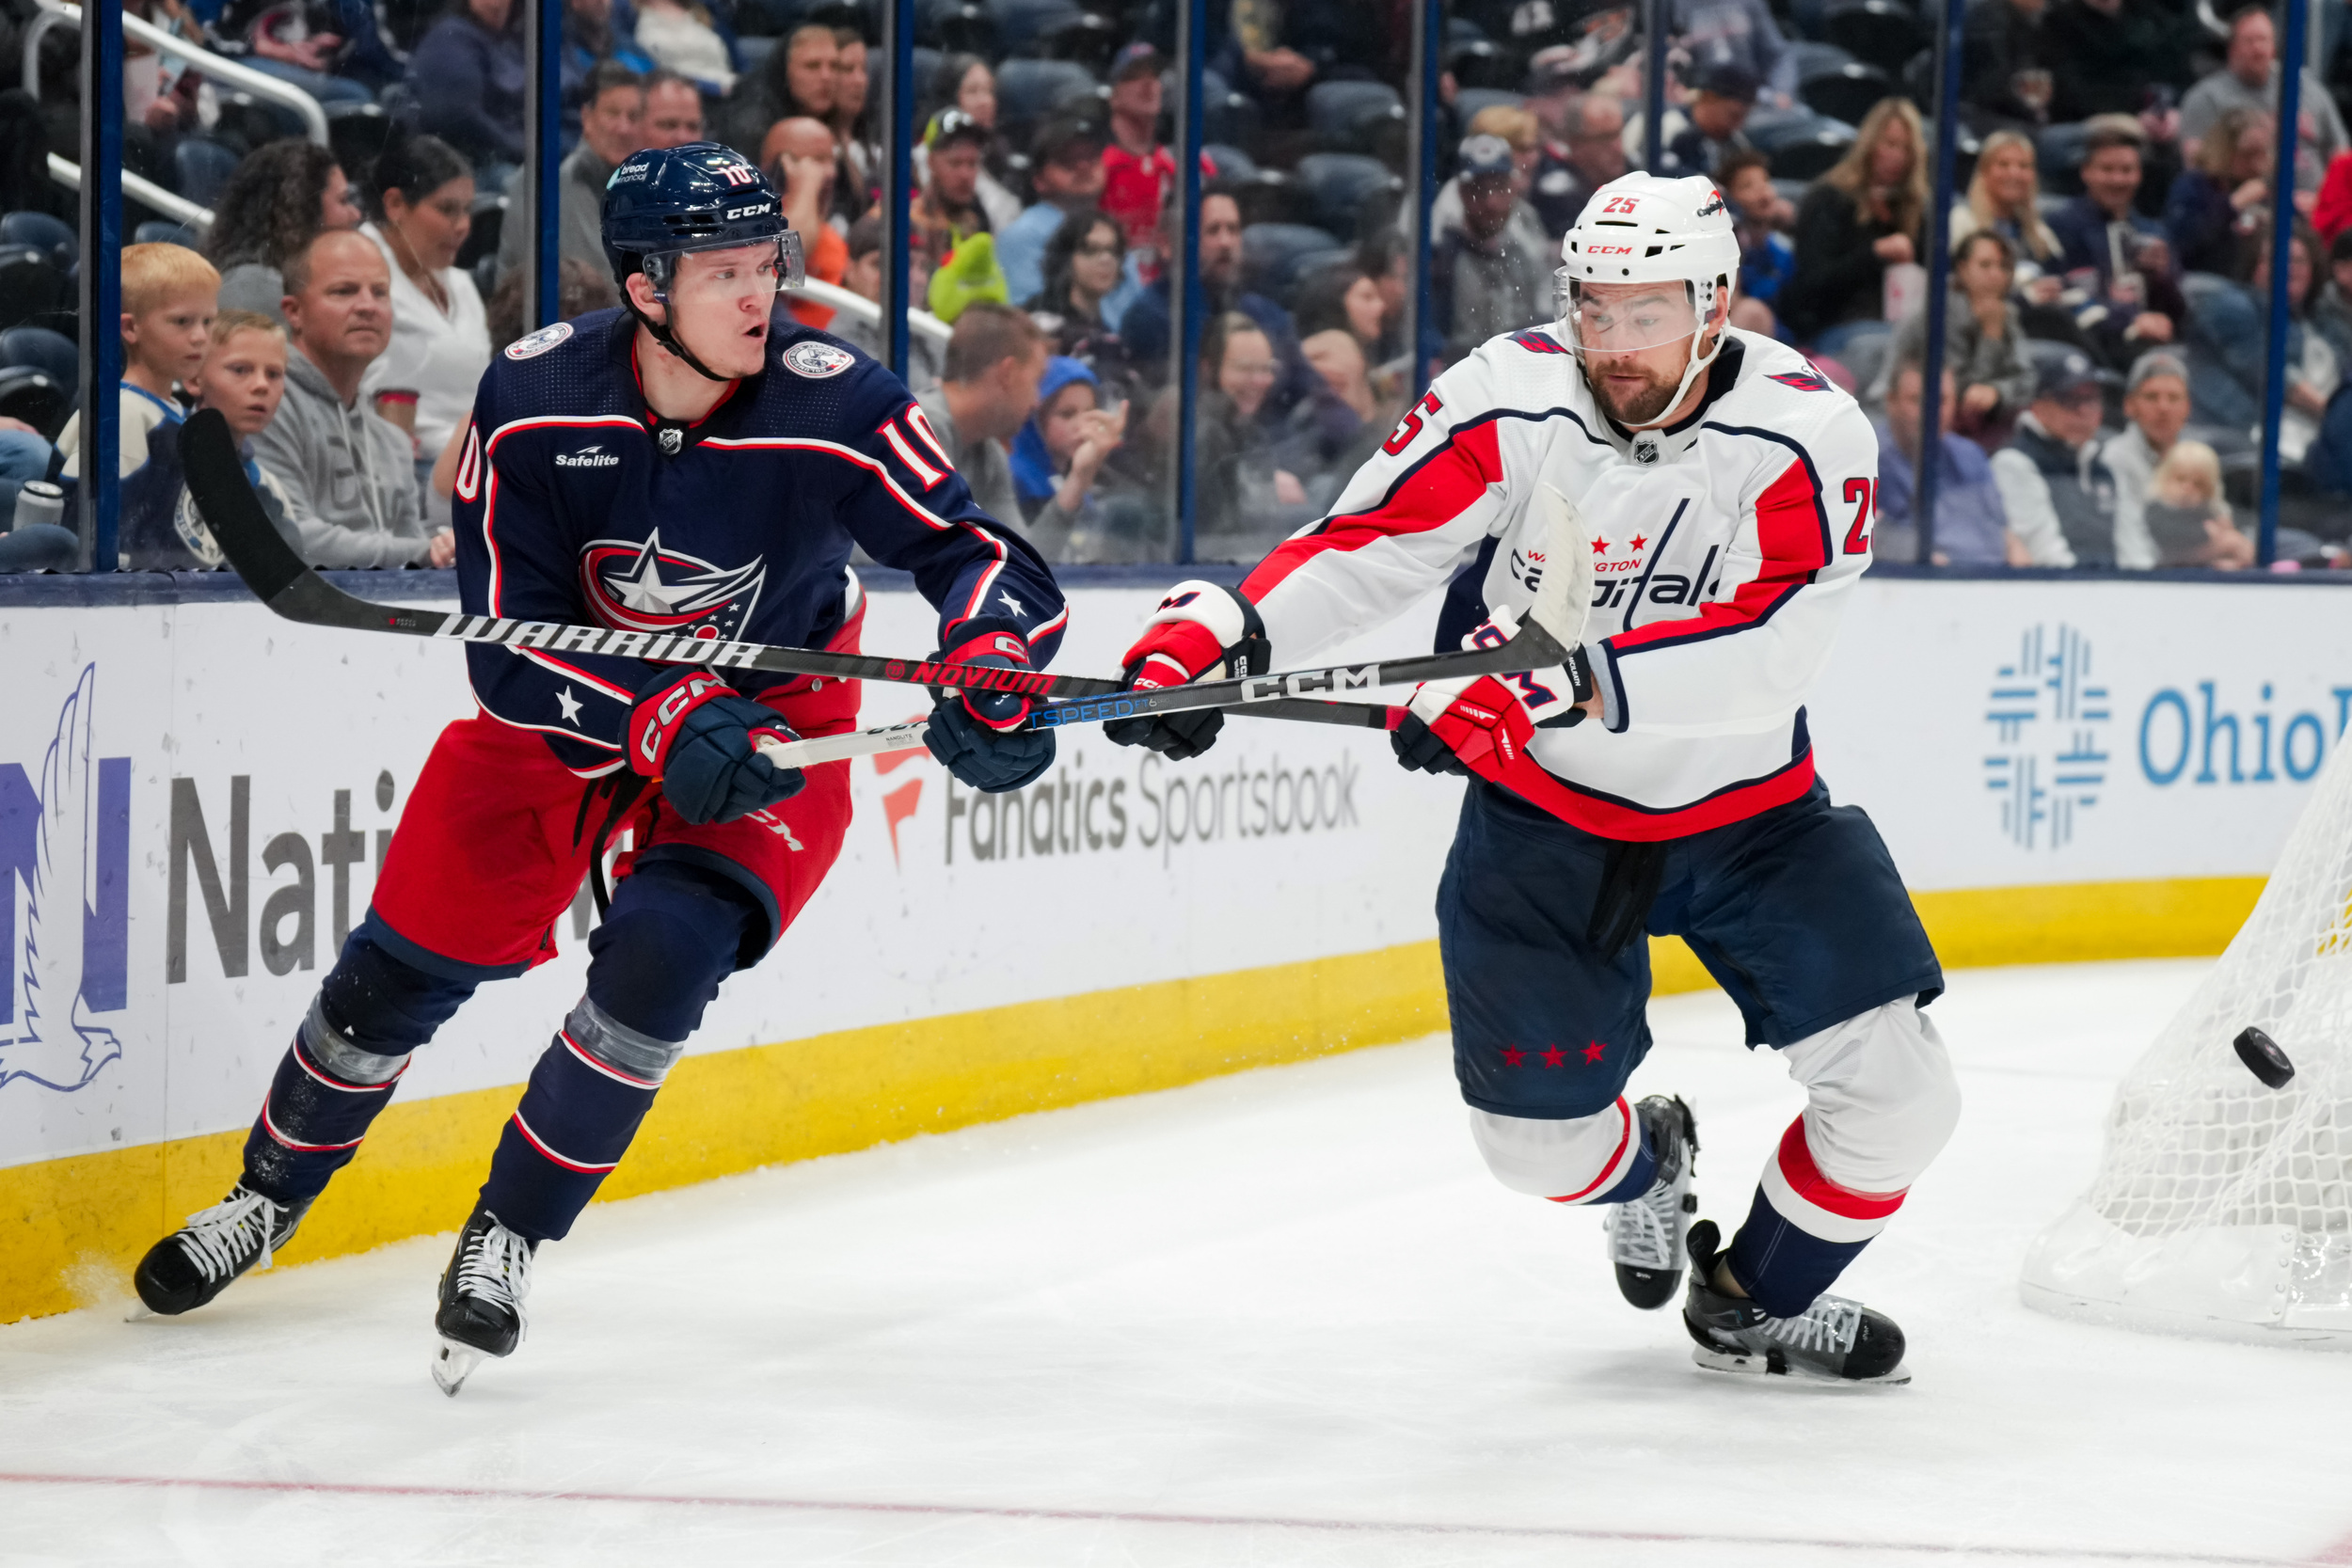 capitals recall veteran defenseman after scary injury situation